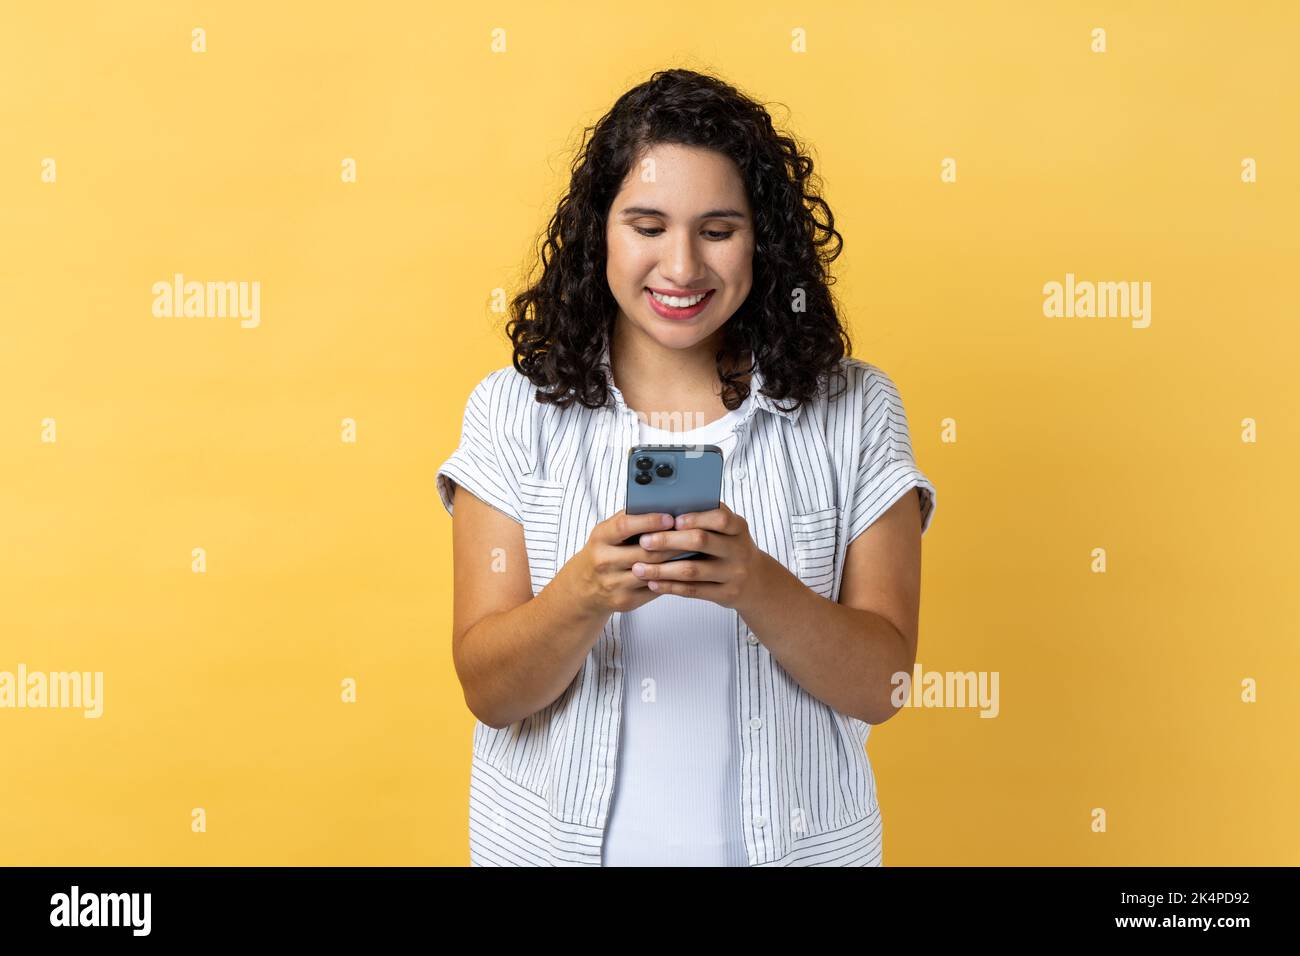 Portrait of smiling satisfied young adult woman with dark wavy hair using mobile phone with happy expression, checking social networks. Indoor studio shot isolated on yellow background. Stock Photo